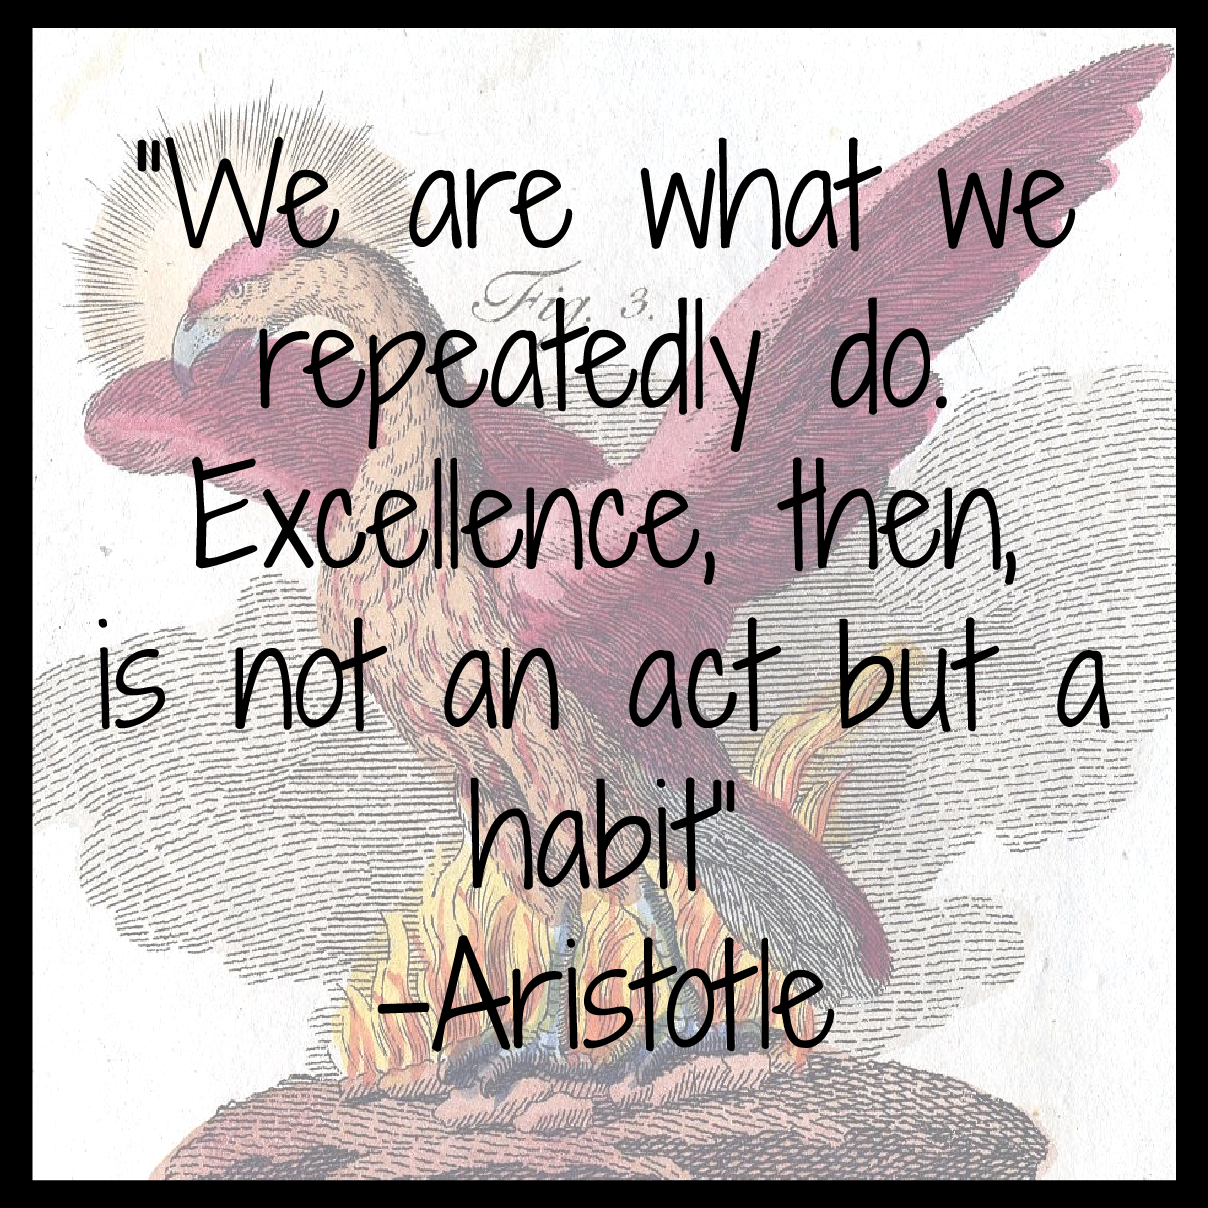 Excellence is a habit